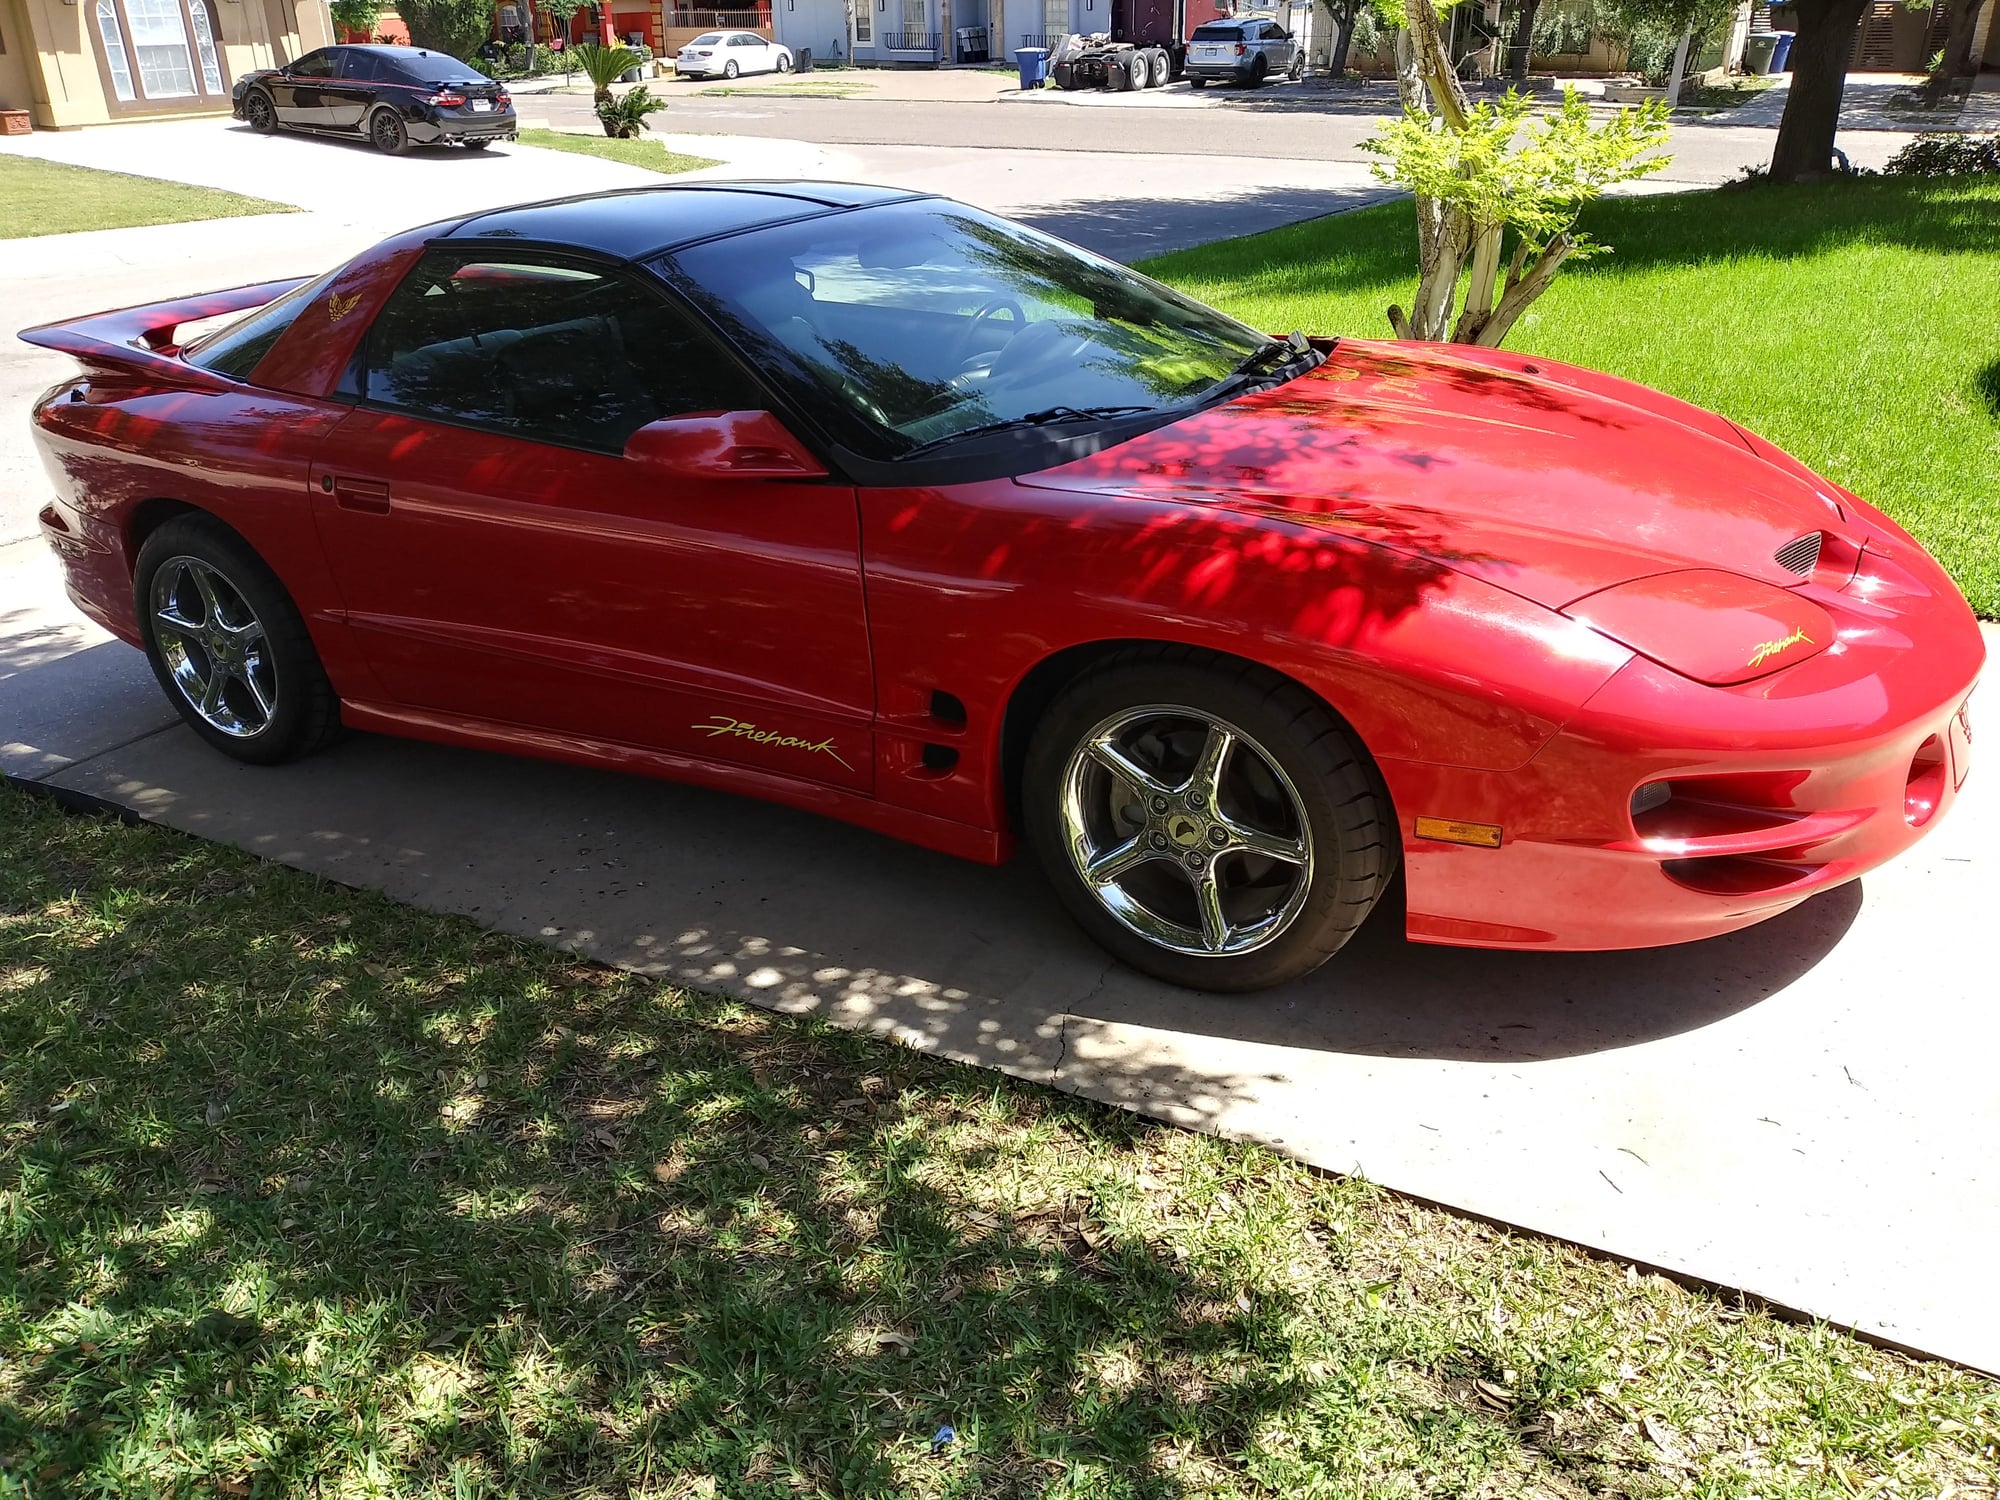 2000 Pontiac Firebird - 2000 Trans Am Firehawk - Used - VIN 2G2ABCDE123456 - 49,071 Miles - 8 cyl - 2WD - Automatic - Coupe - Red - Laredo, TX 78045, United States